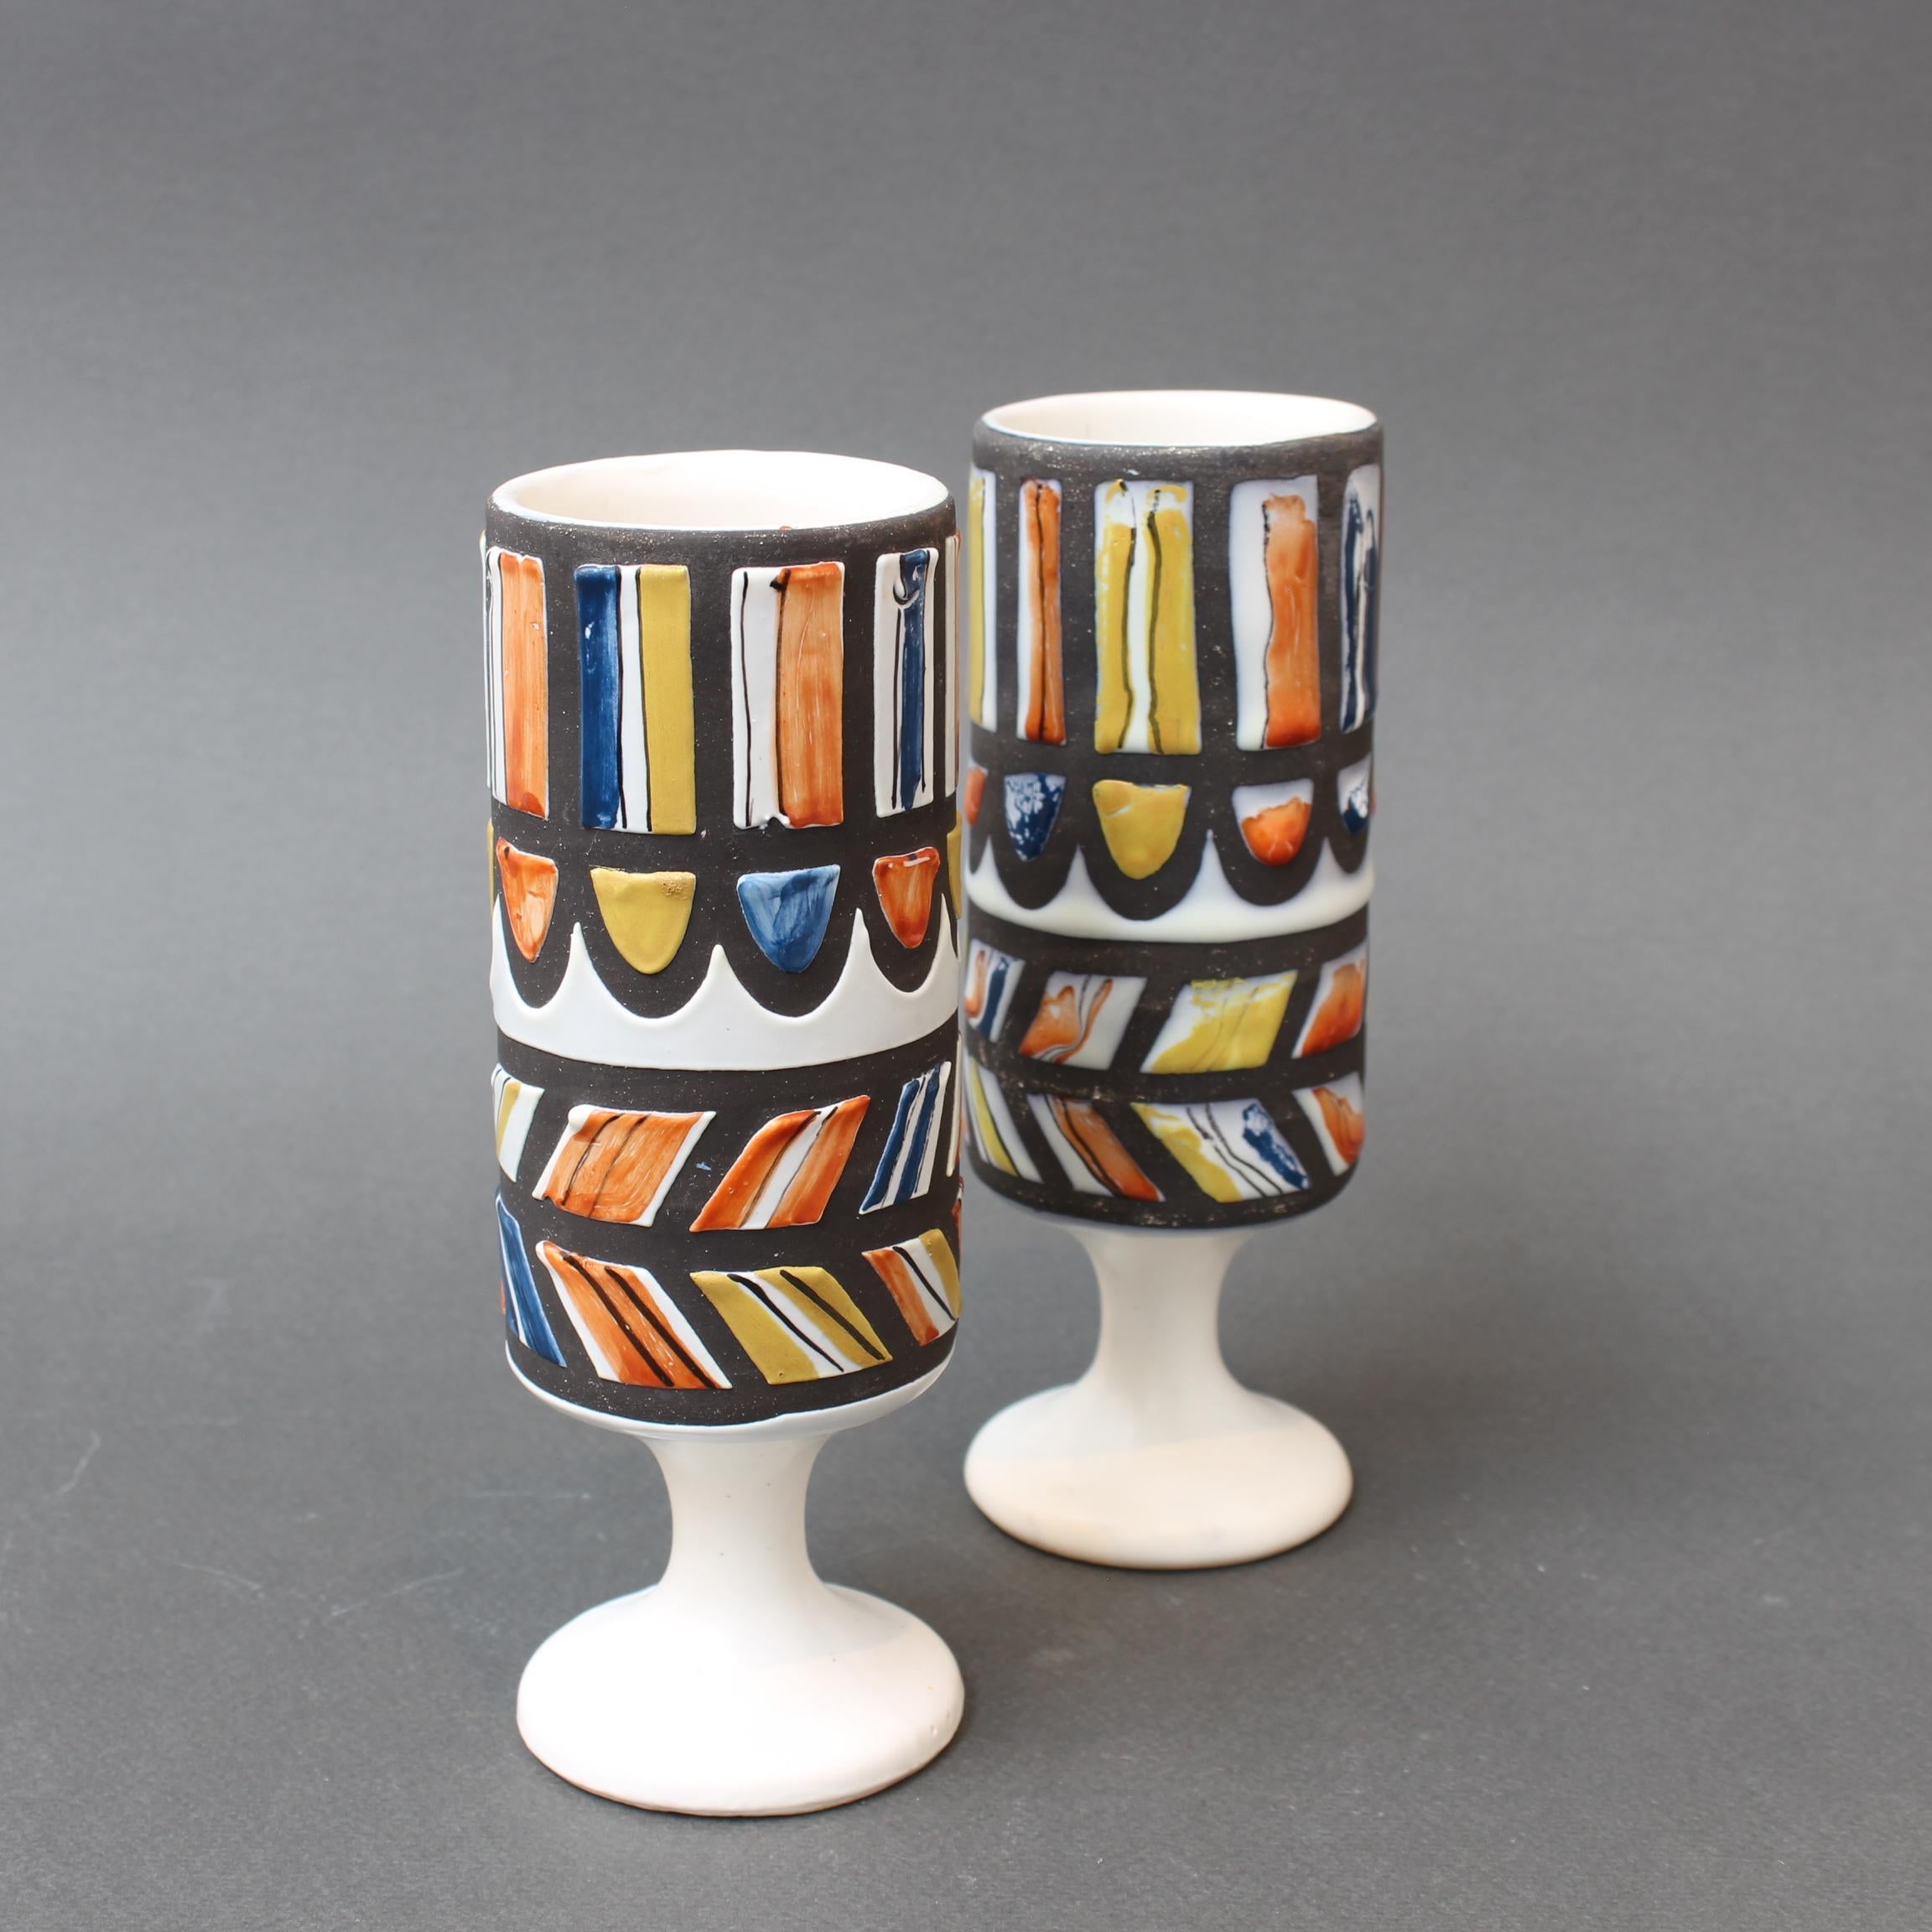 Vintage French Ceramic Set of Vessels by Roger Capron (circa 1960s) For Sale 13